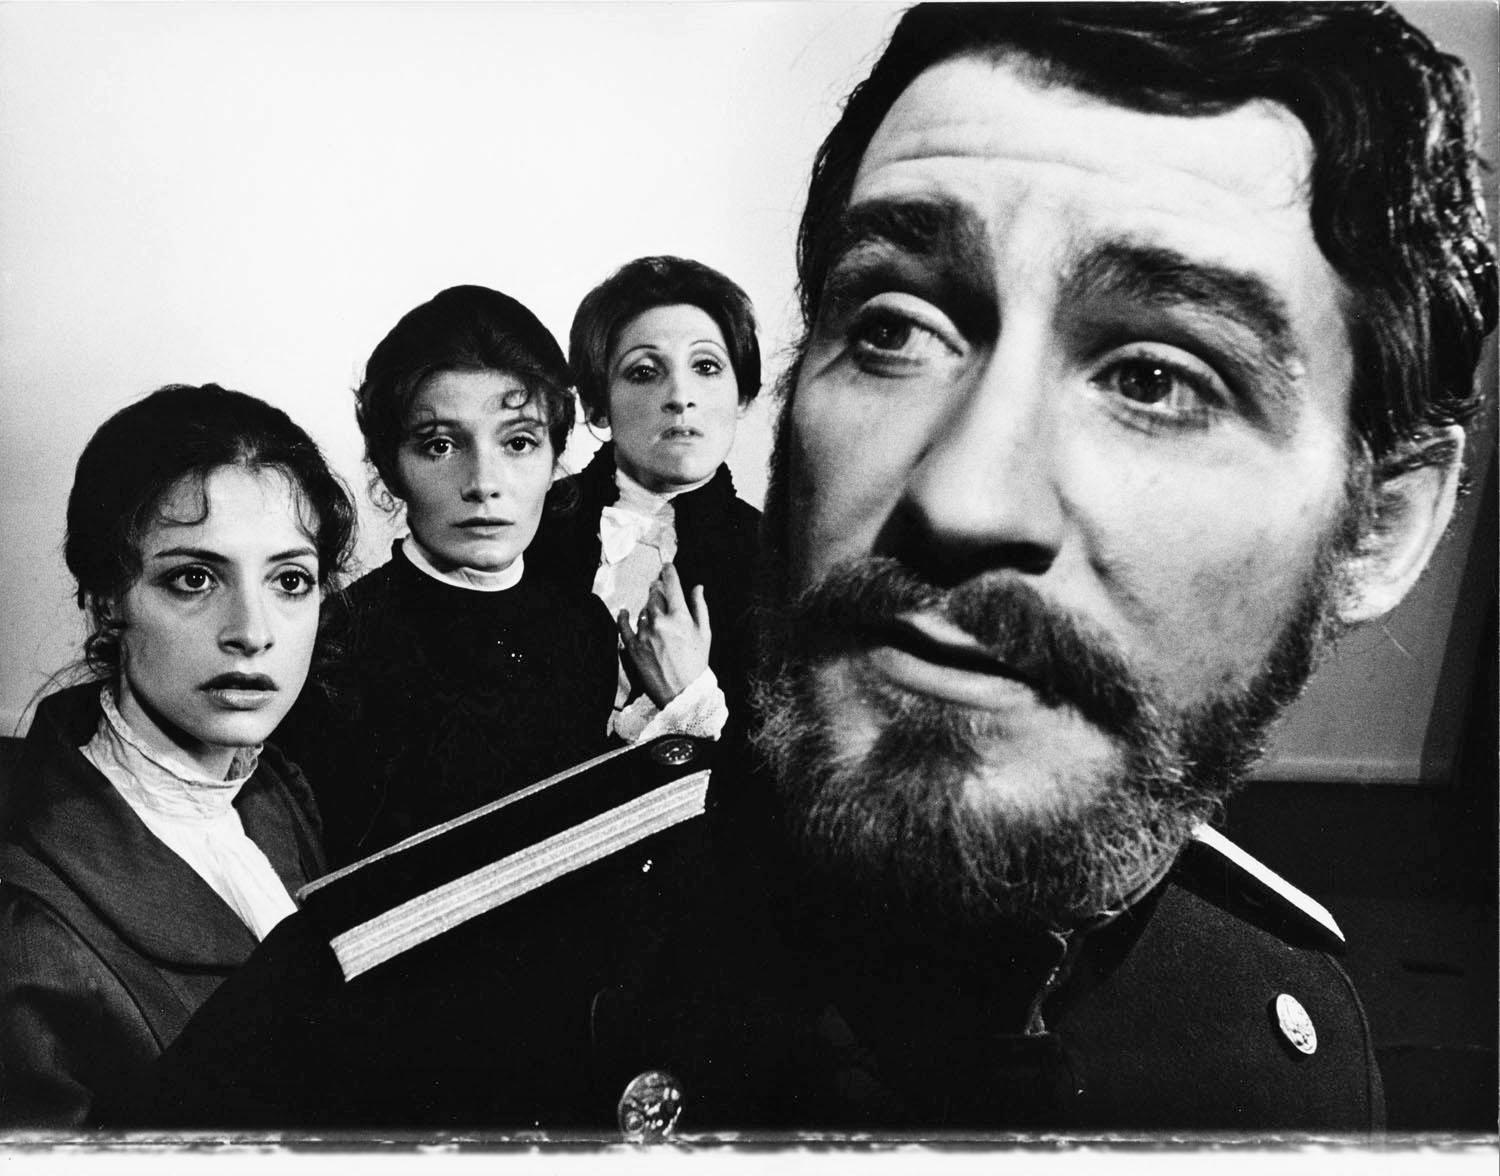 Jack Mitchell Black and White Photograph -  Kevin Kline, Patti LuPone and the cast of "Three Sisters" signed by Jack